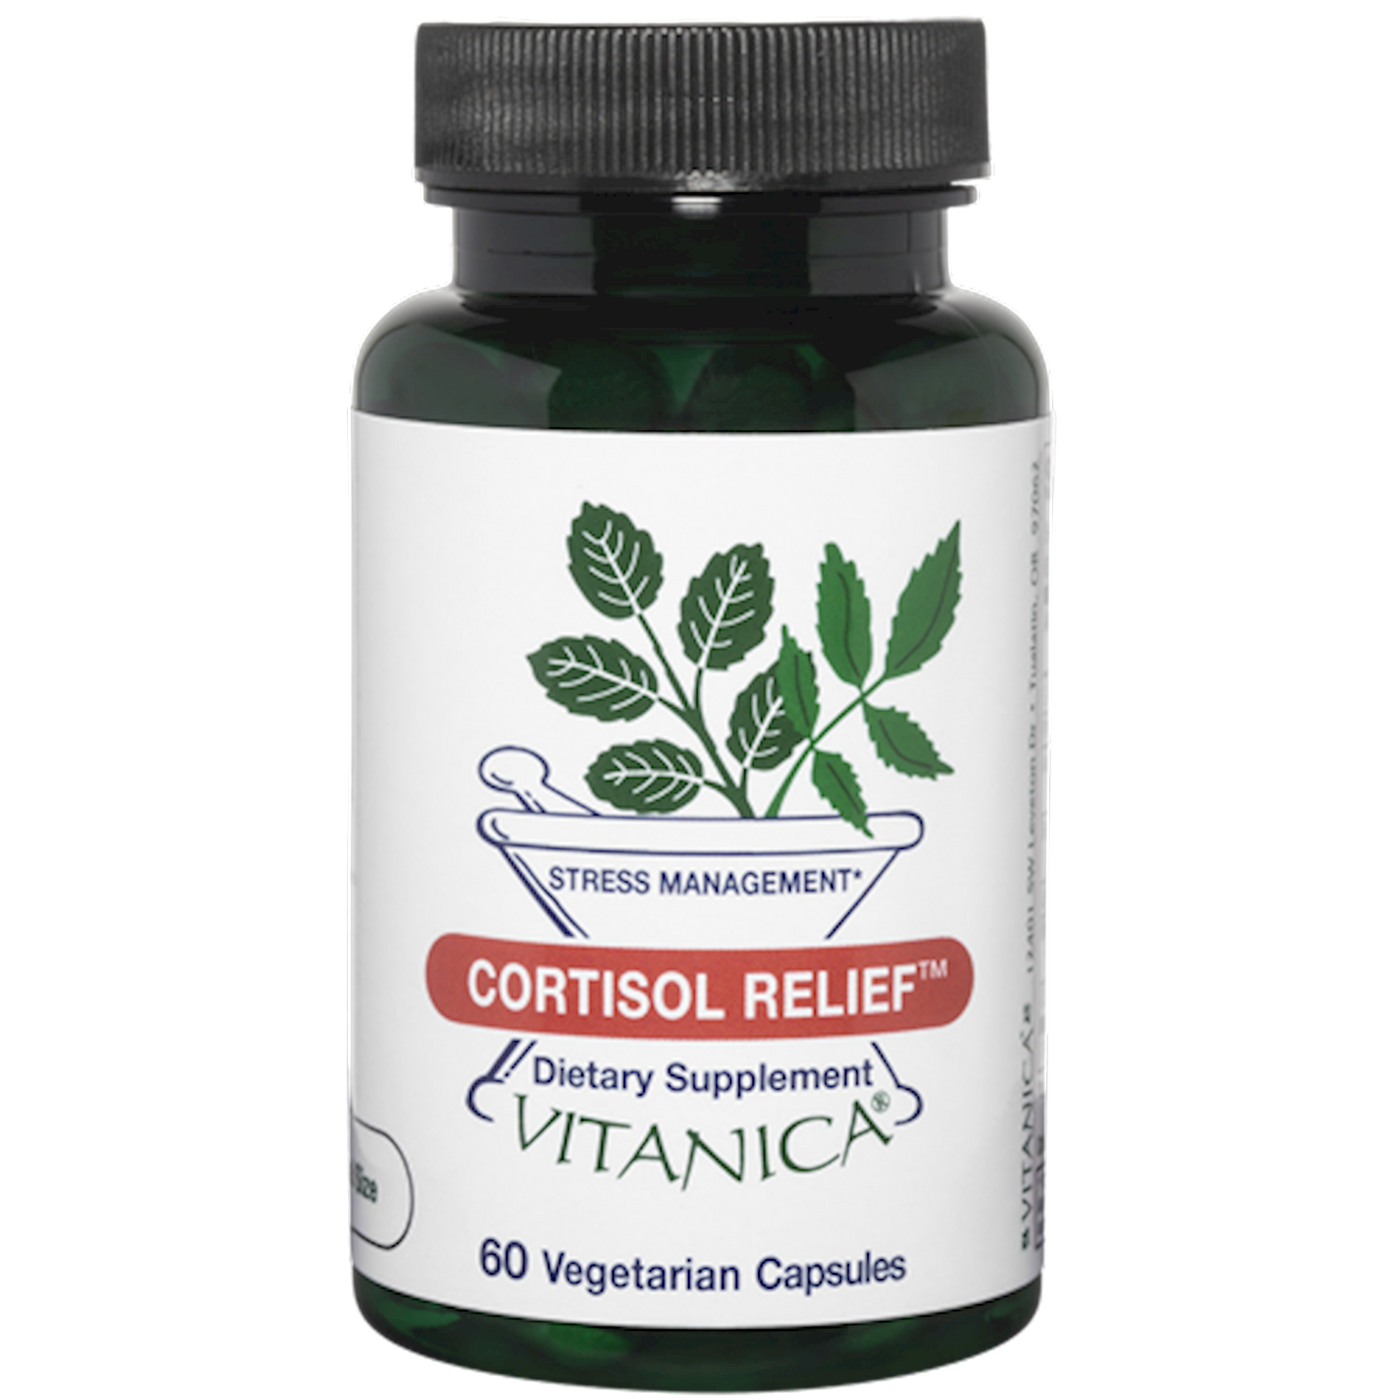 Cortisol Relief  Curated Wellness